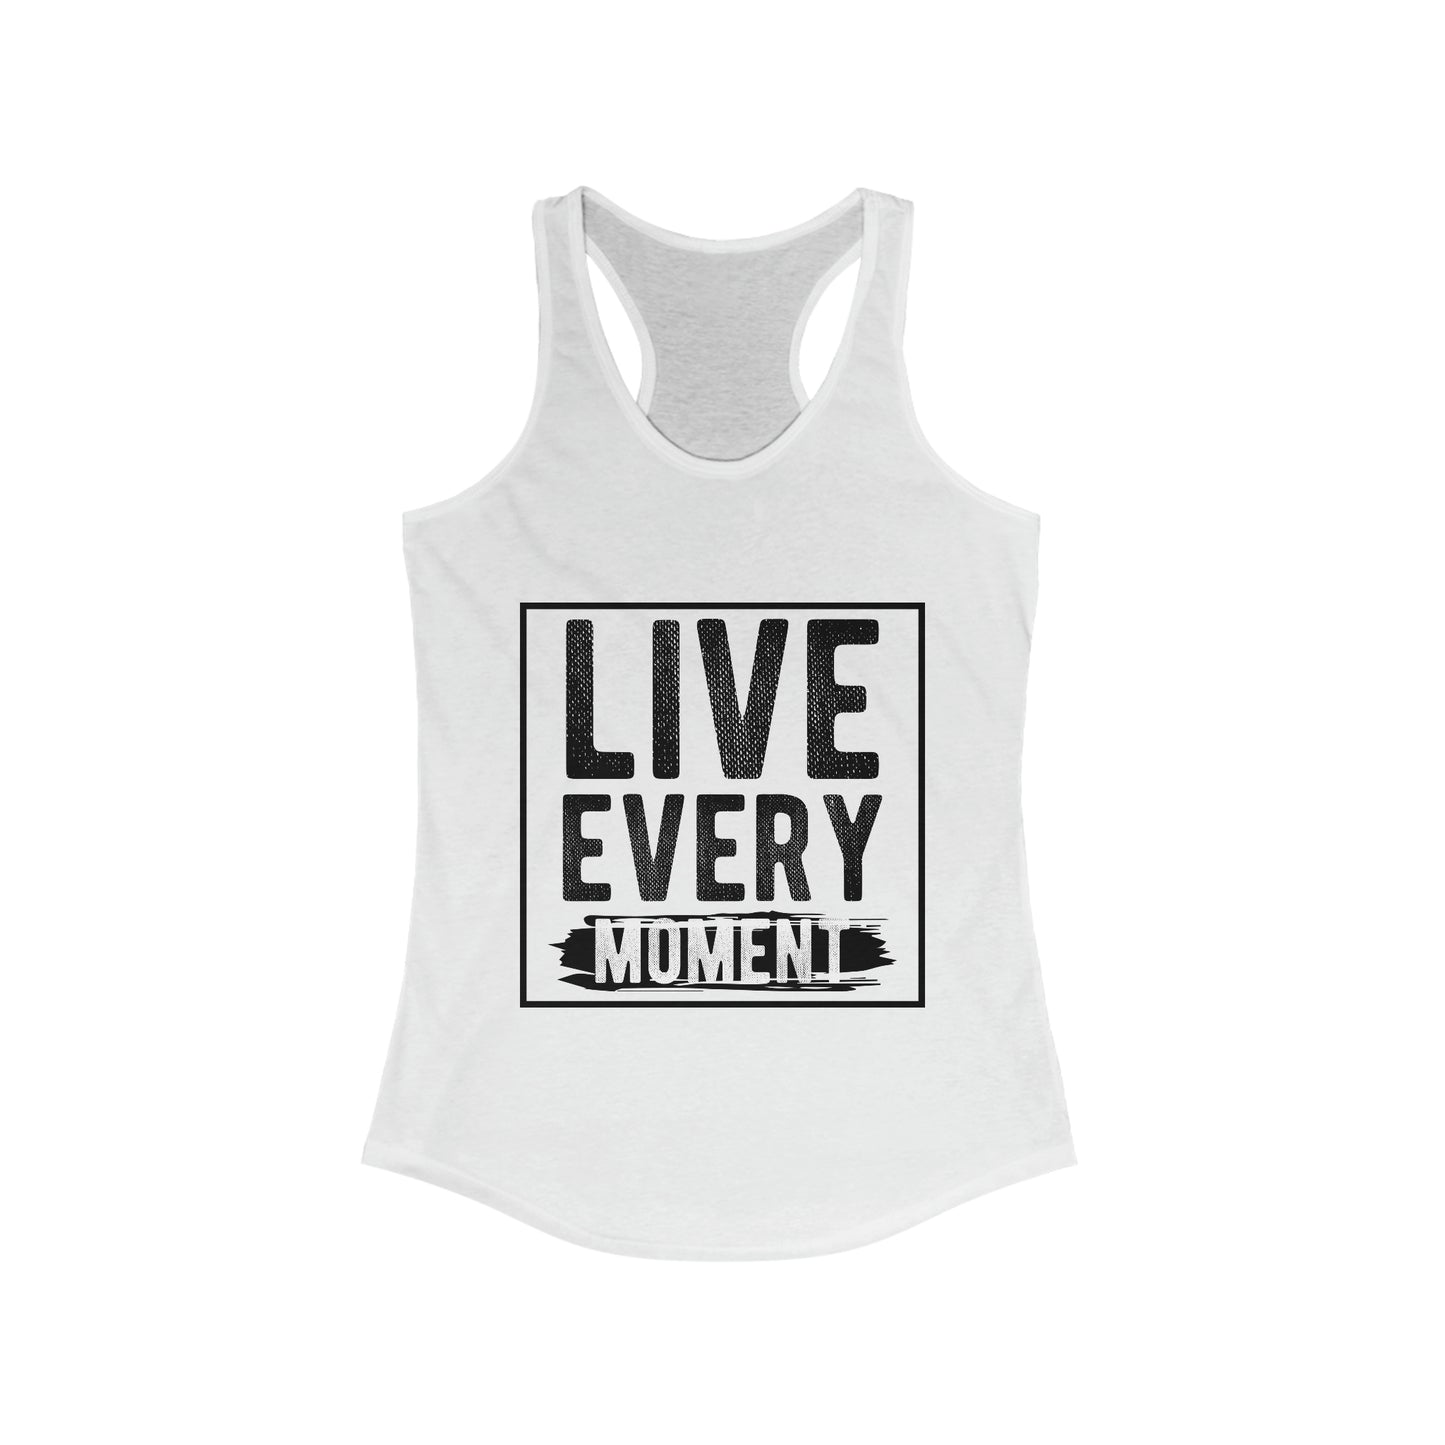 Live Every Moment Women's Ideal Racerback Tank